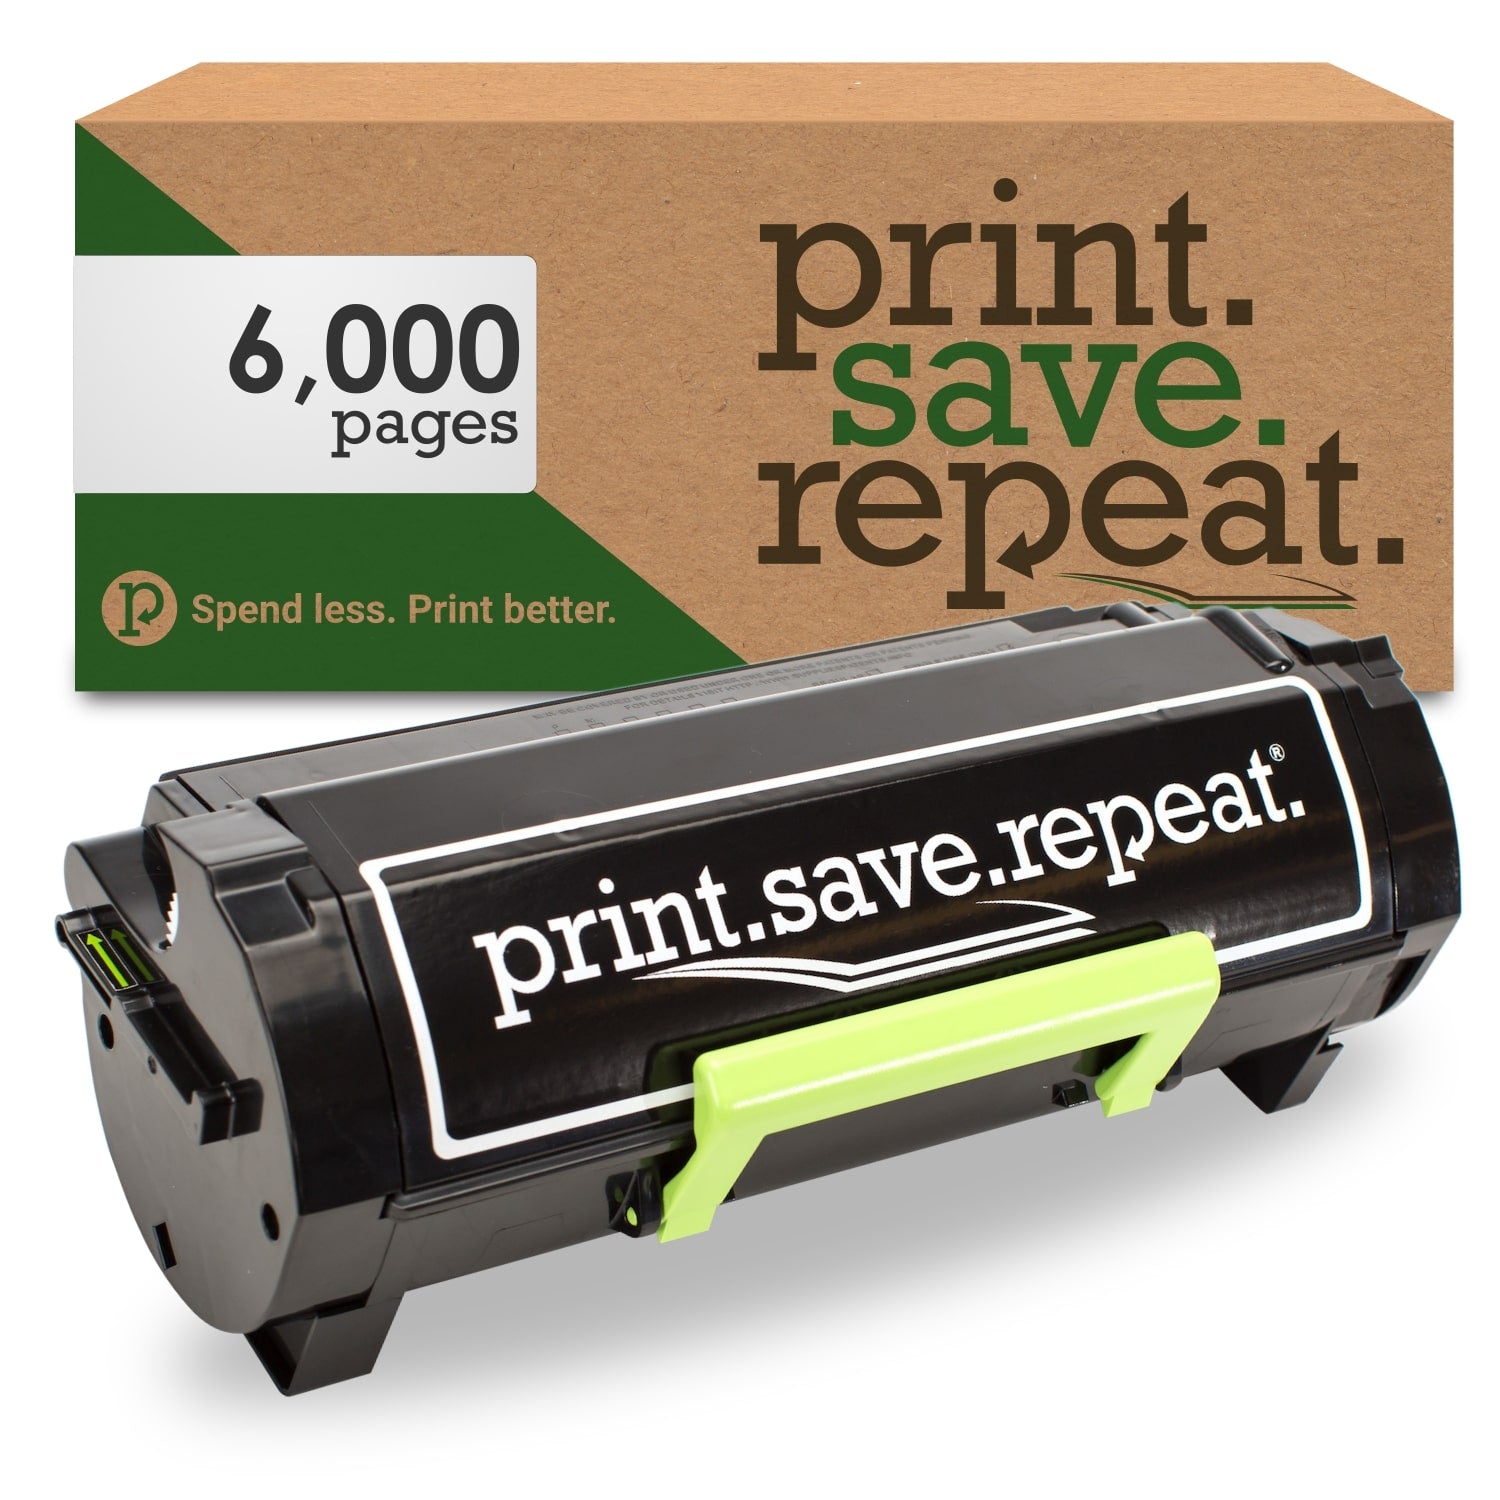 Print.Save.Repeat. Lexmark 56F000G Standard Yield Remanufactured Toner Cartridge for MS321, MS421, MS521, MS621, MS622, MX321, MX421, MX521, MX522, MX622 [6,000 Pages]